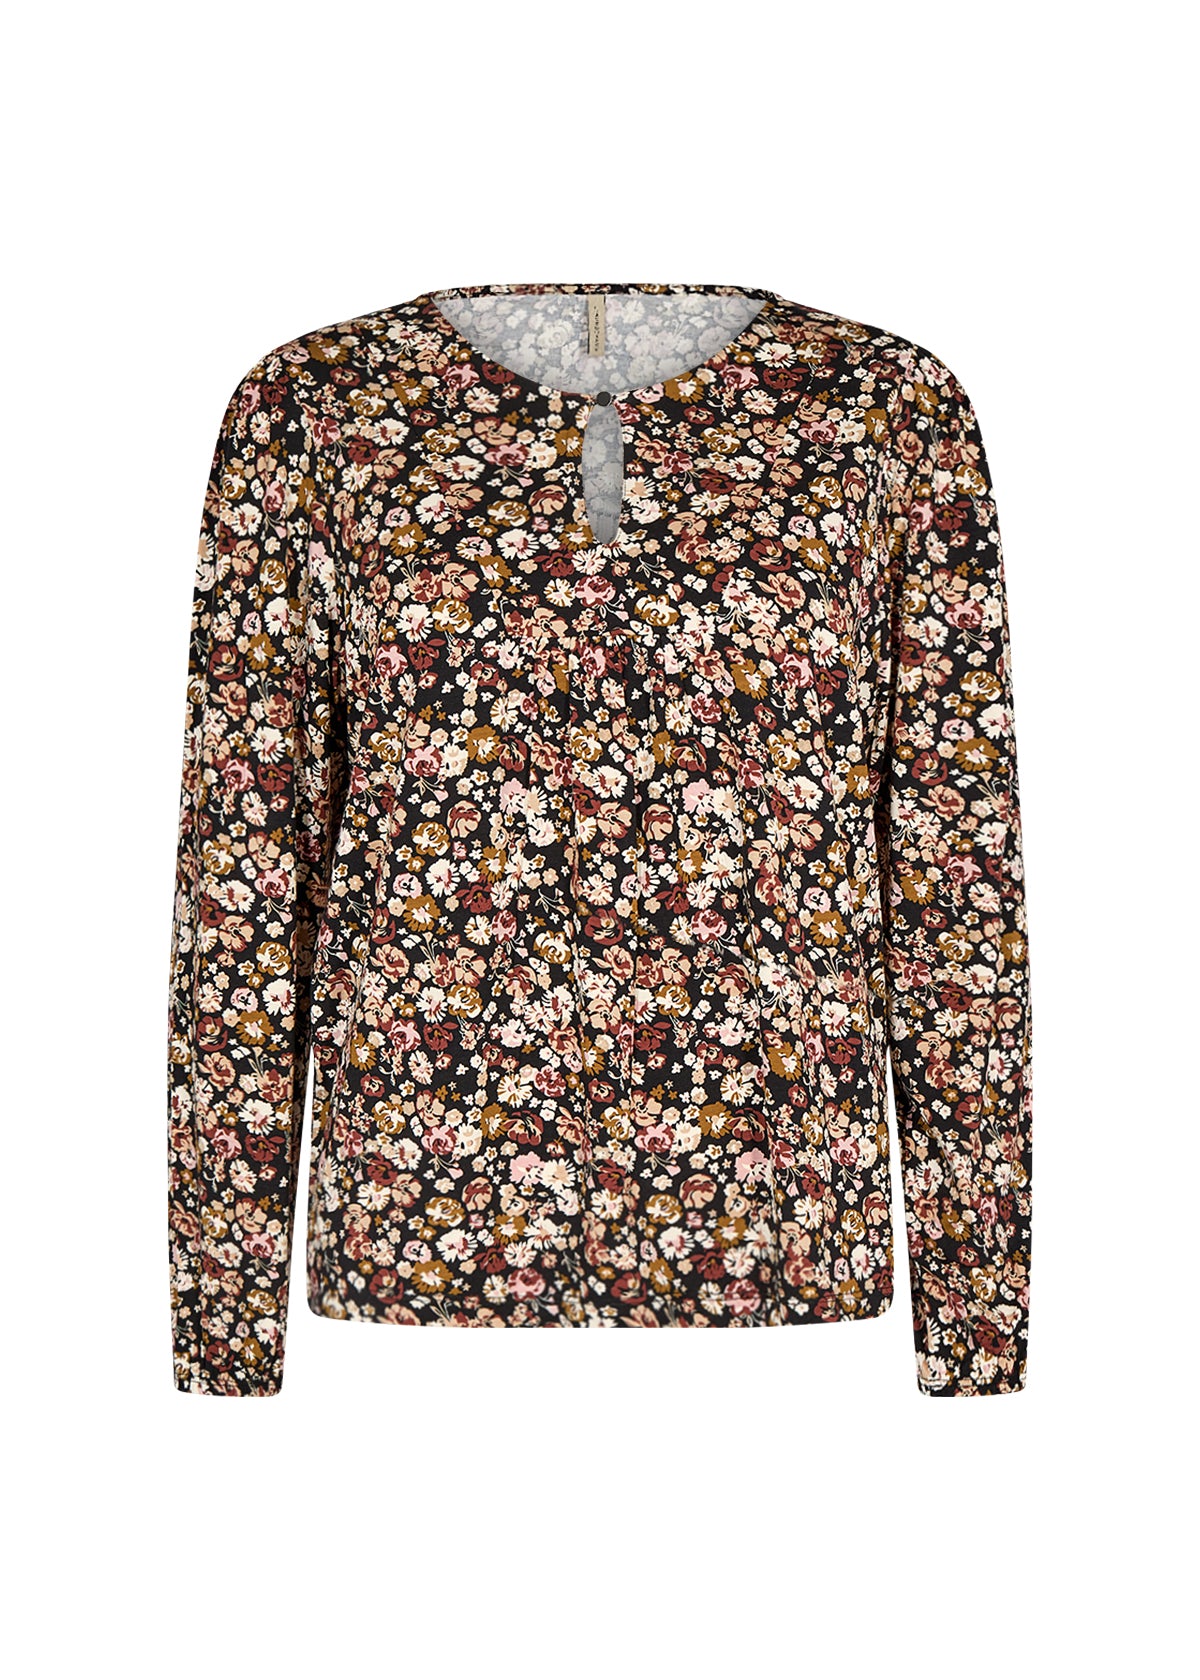 The Marcia Top in Floral